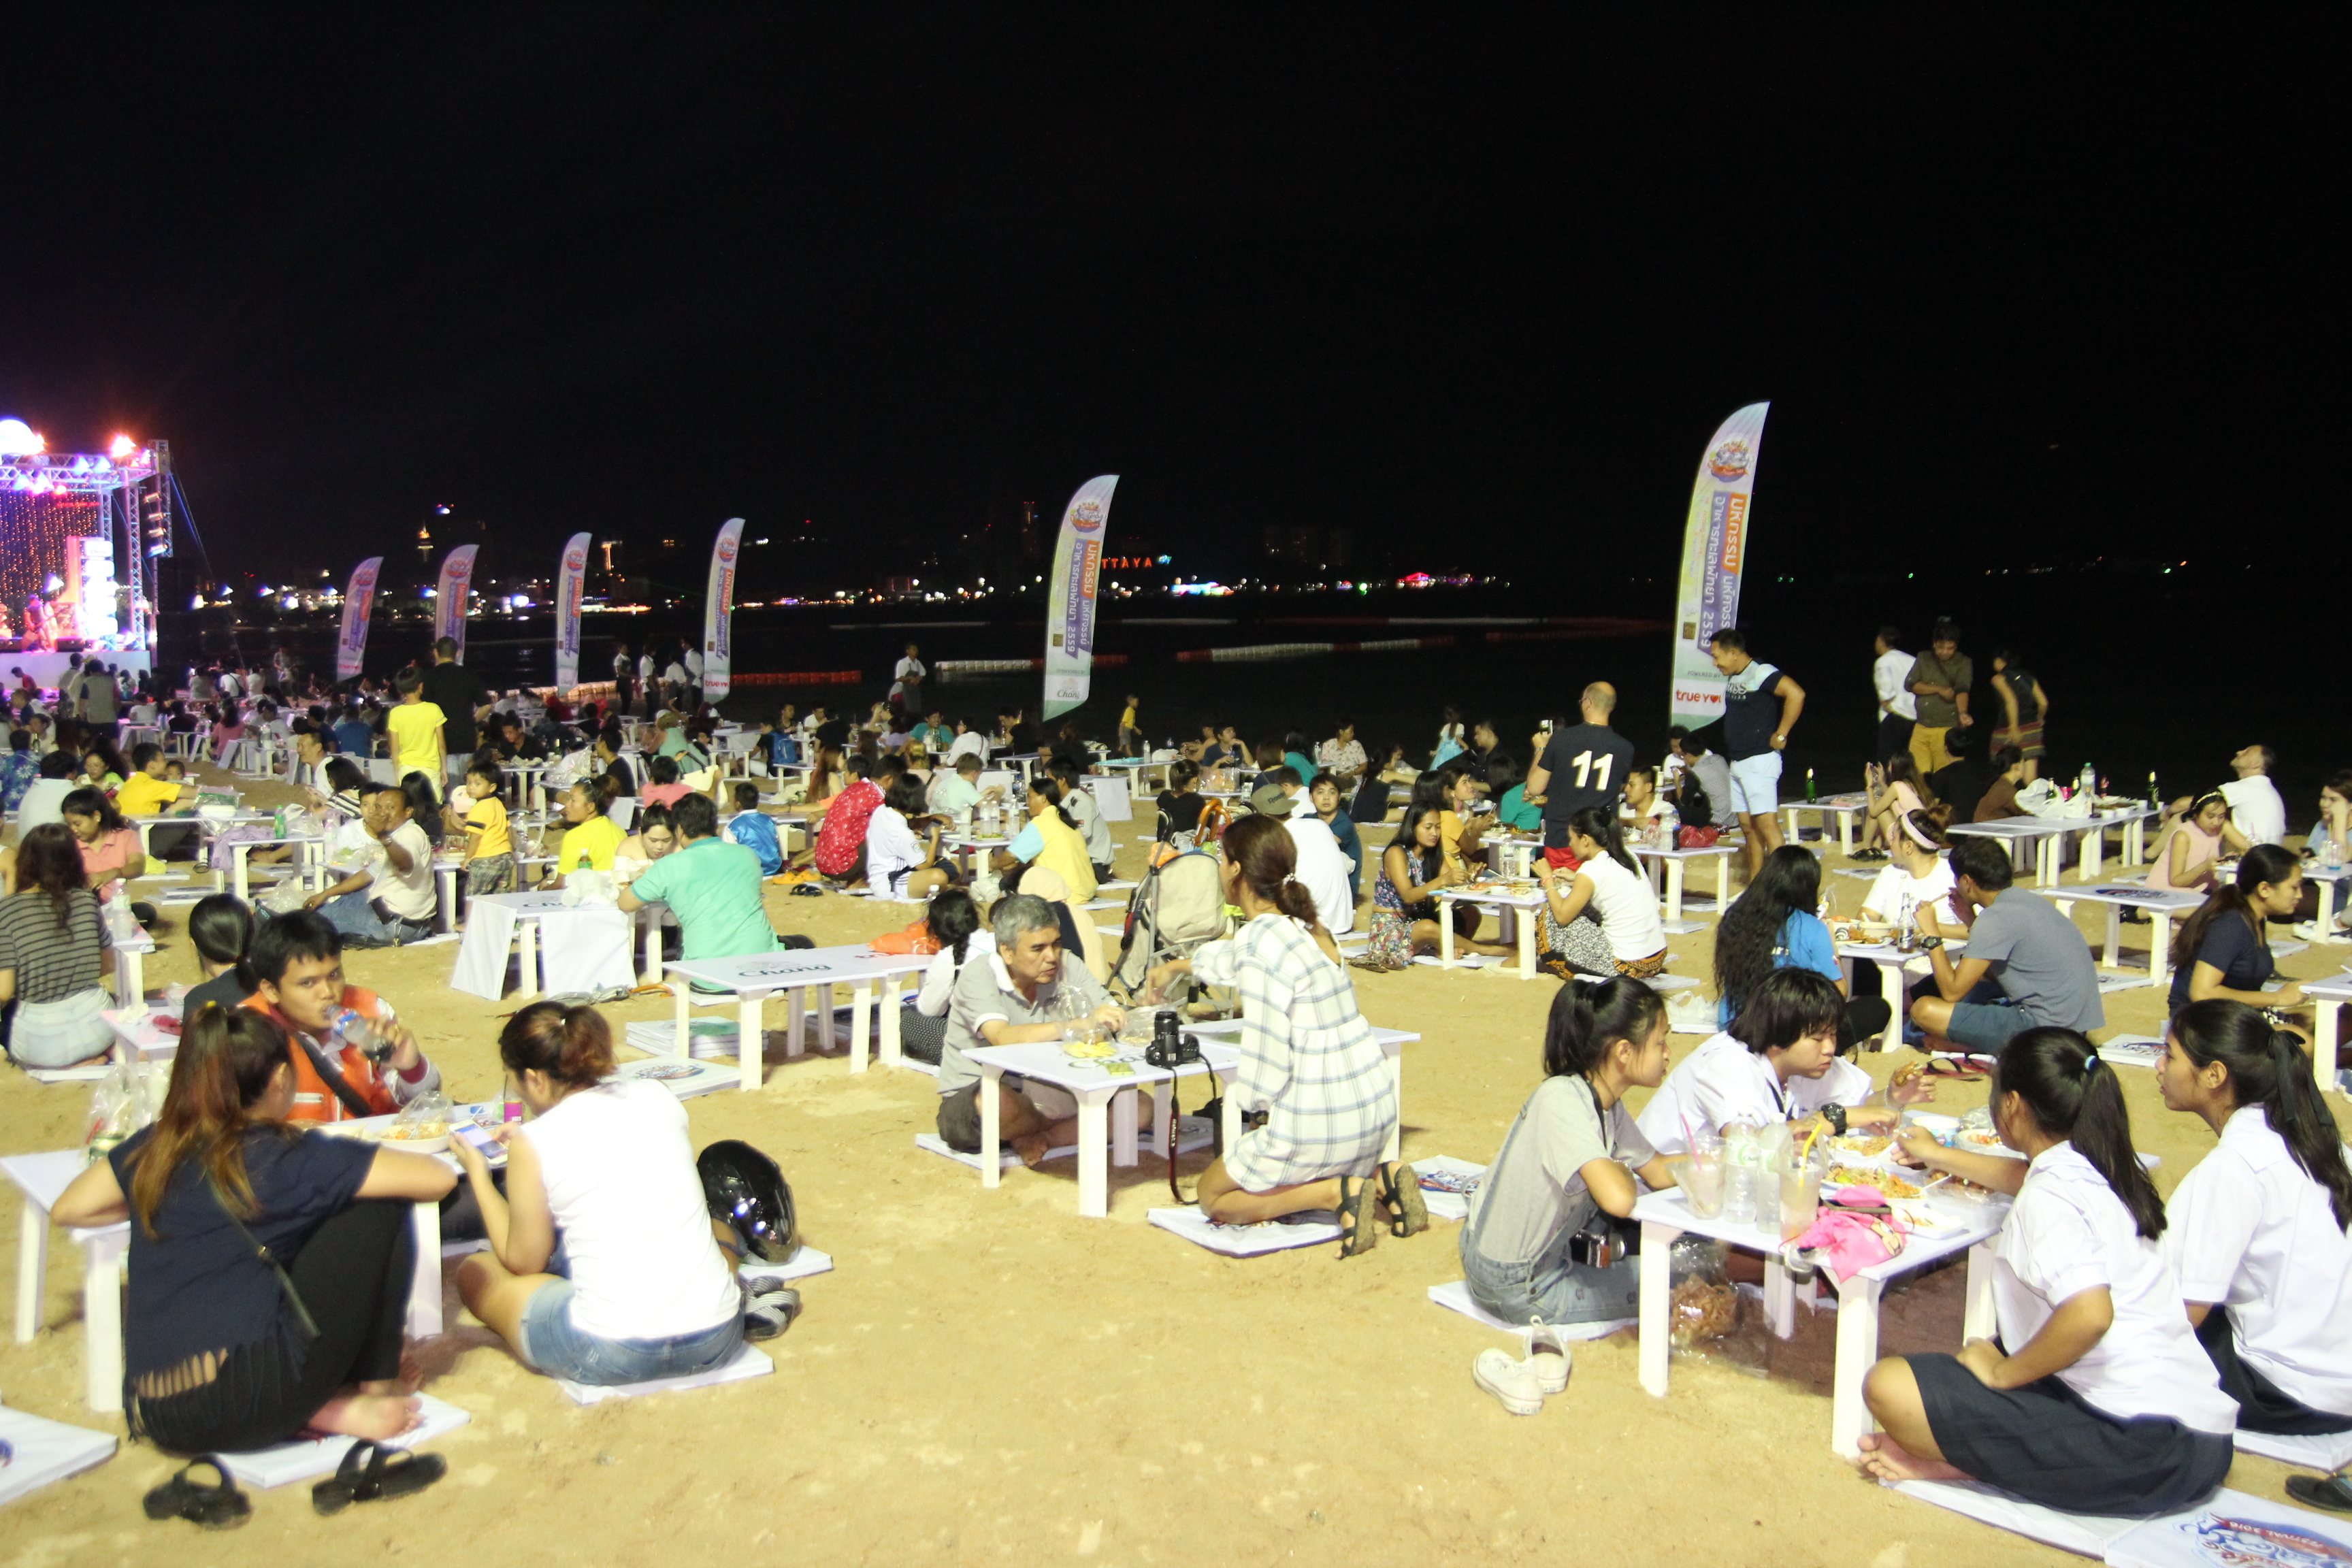 It will be all-you-can-eat seafood on Beach Road May 5-7 as the Amazing Seafood Festival returns to Pattaya.